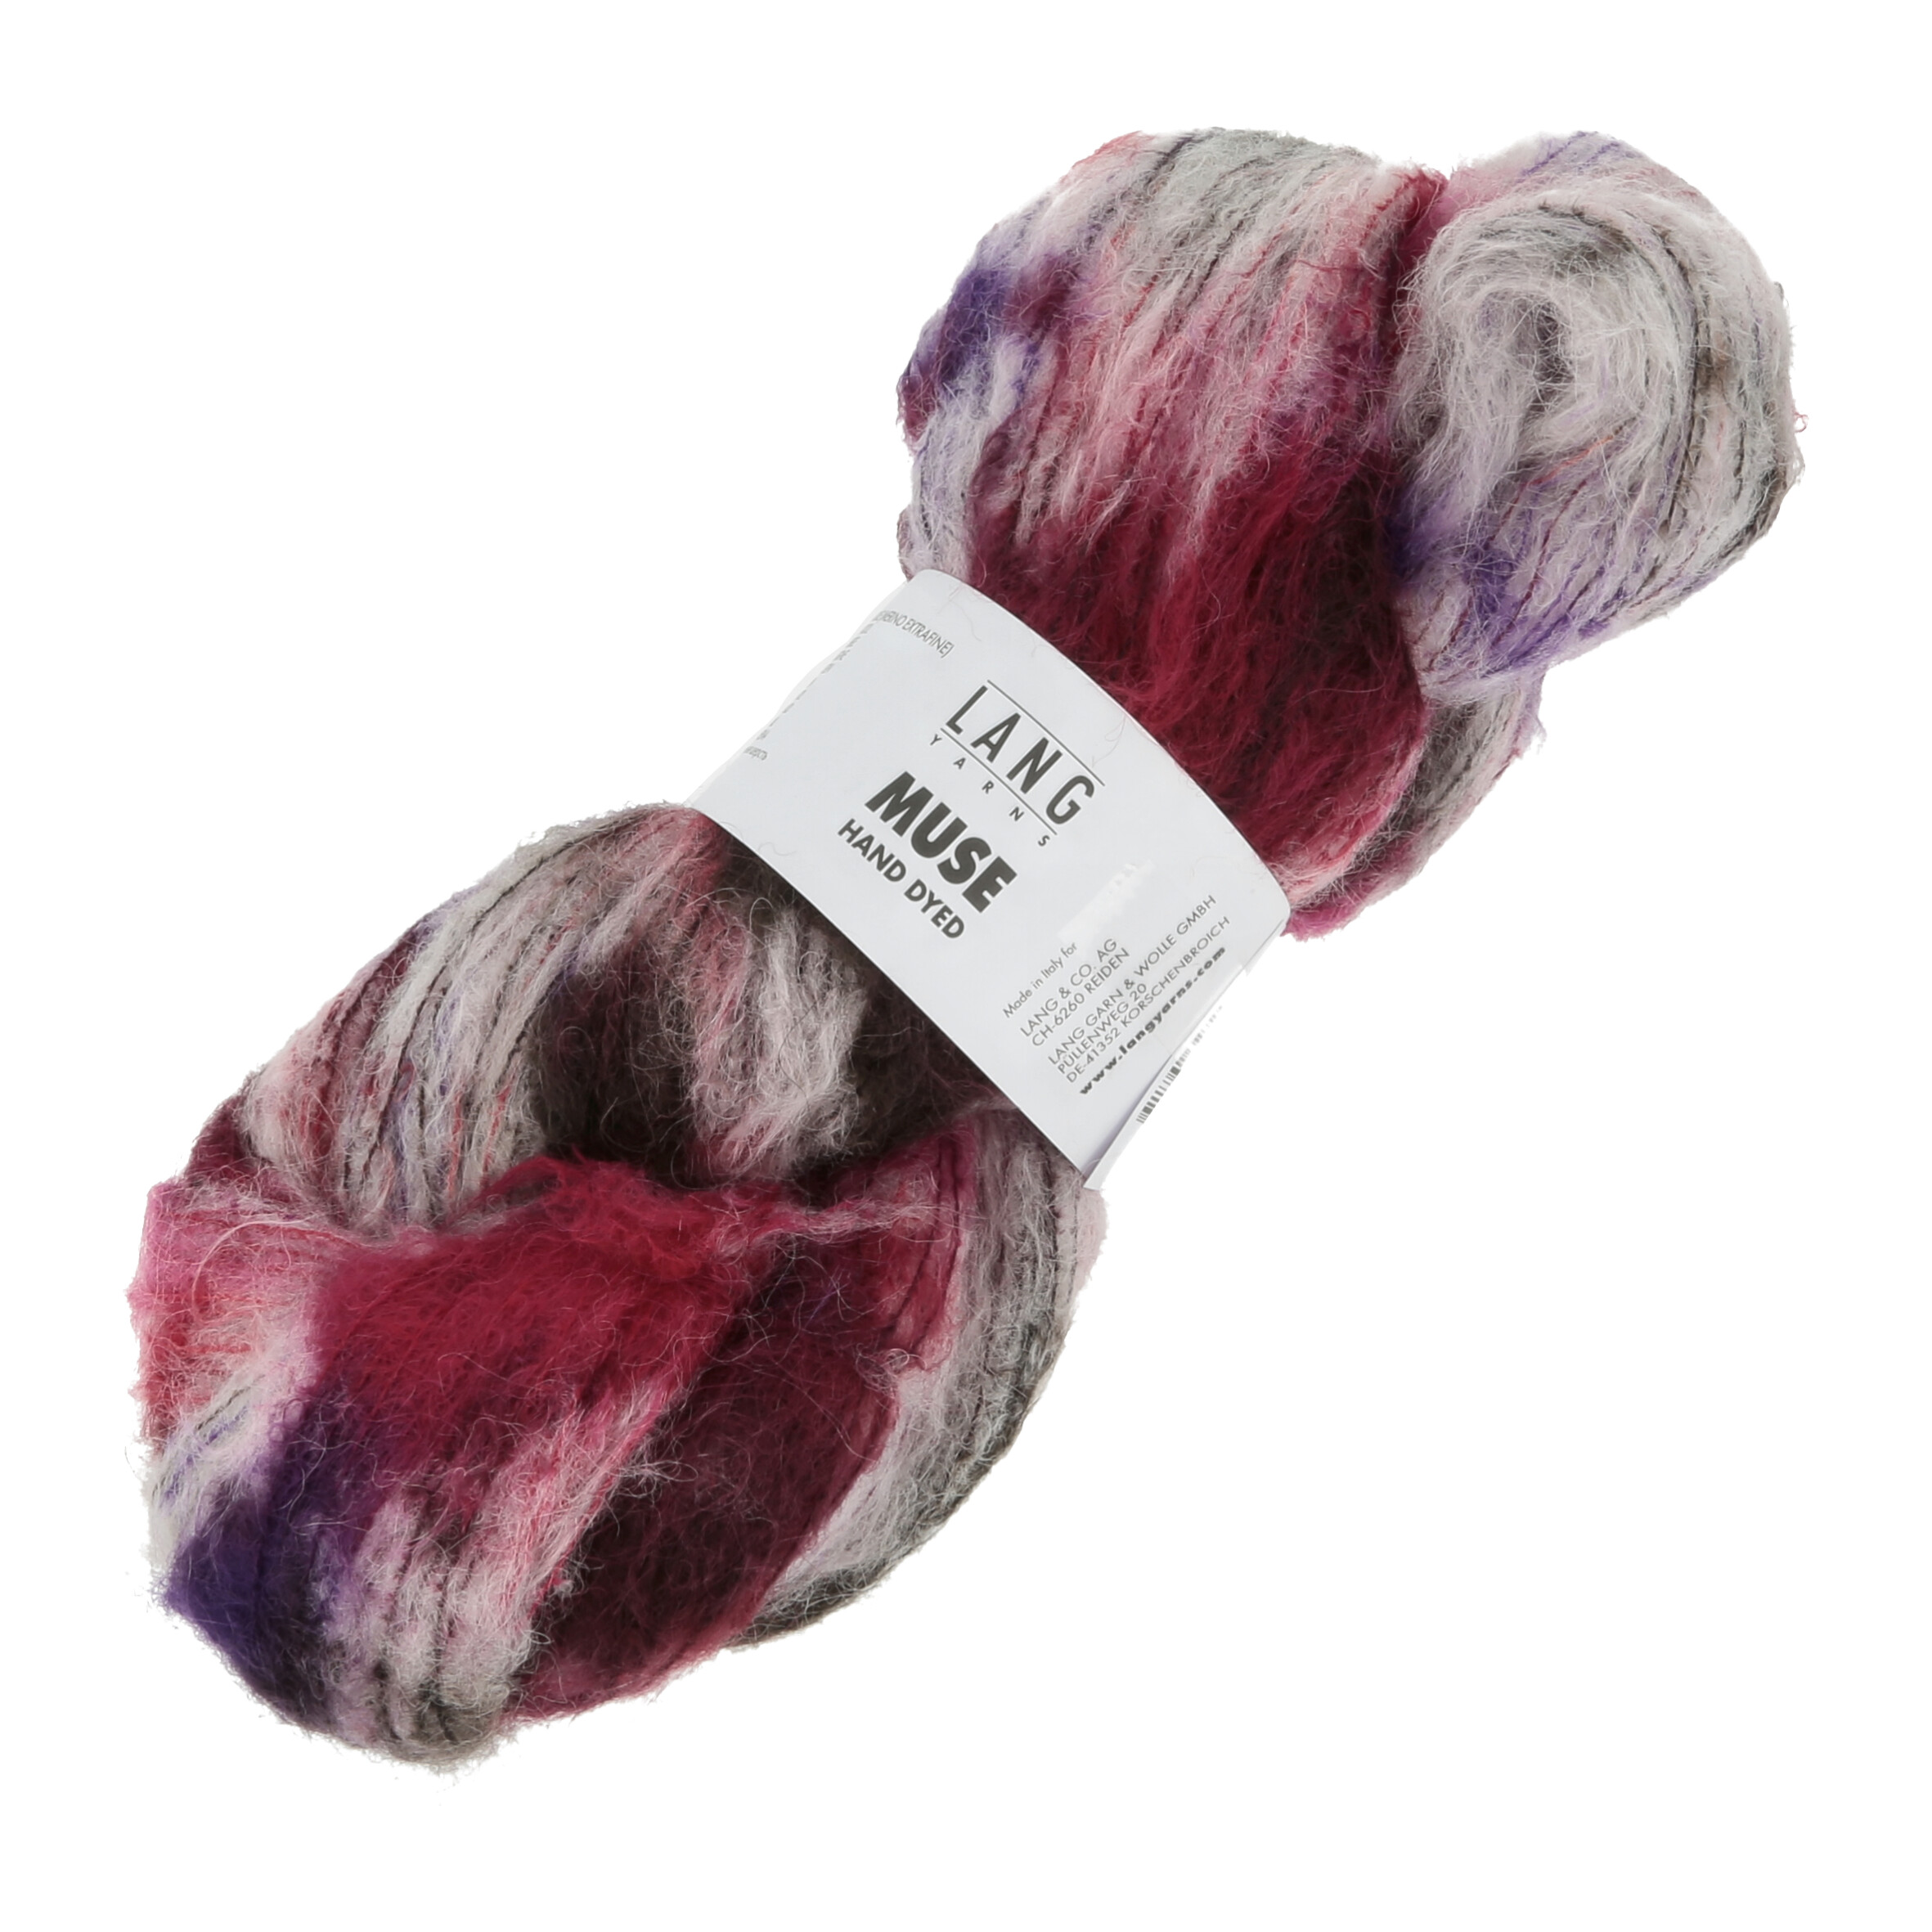 LANG MUSE (HAND DYED) 0001 ROSSO/VIOLA 100GR